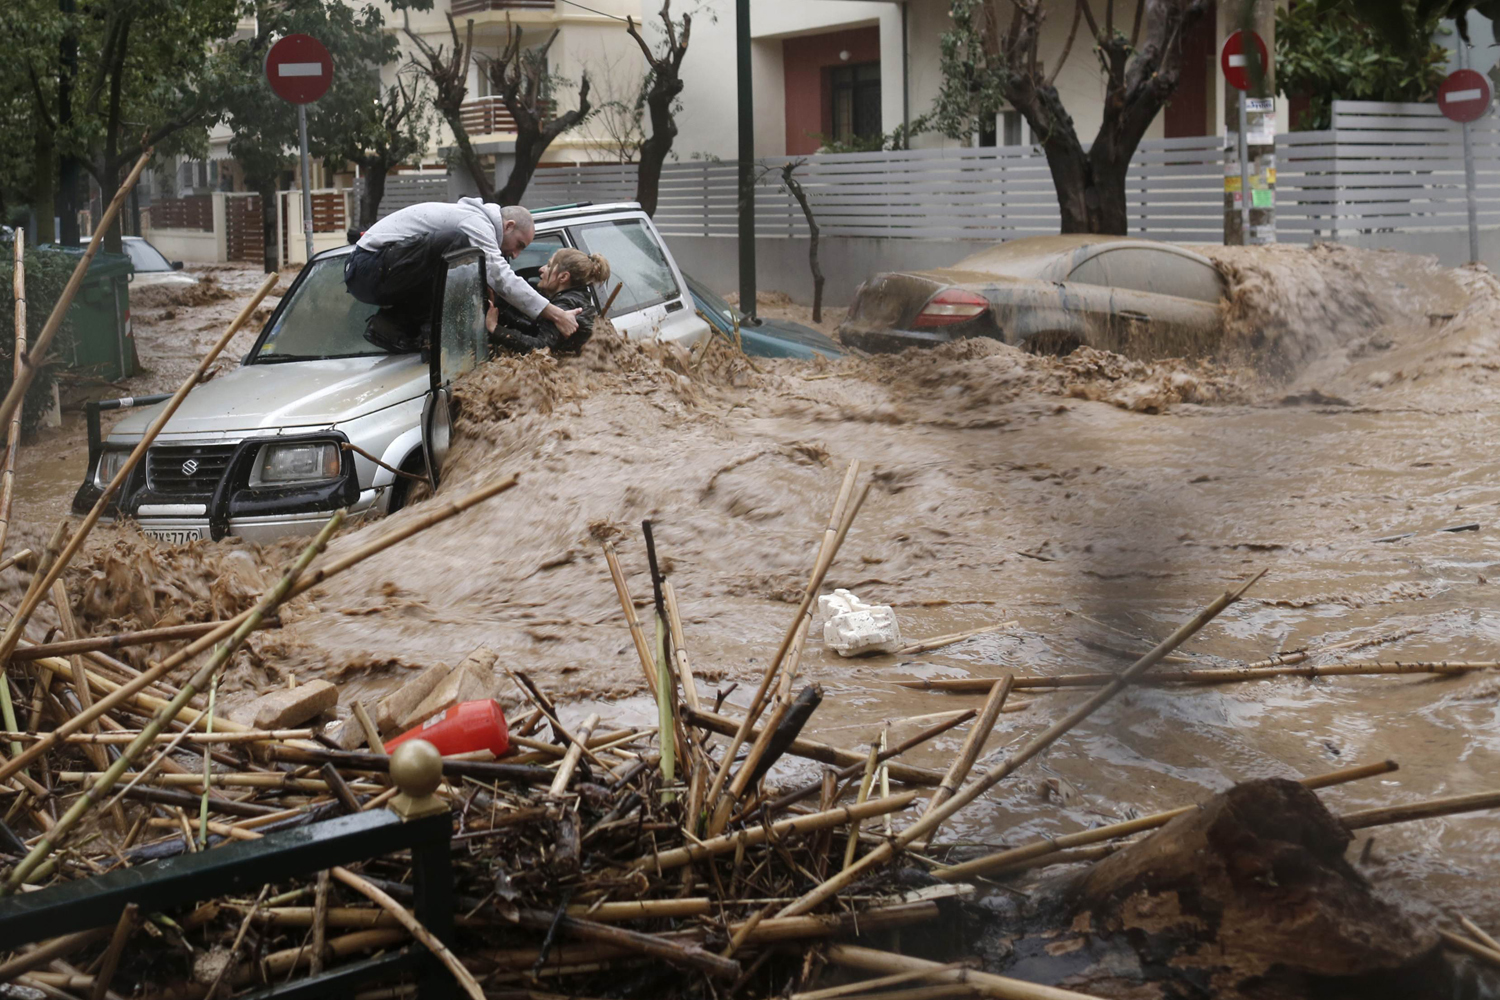 A woman is rescued from flood waters by a resident standing on top of her car during heavy rain in Chalandri suburb north of Athens